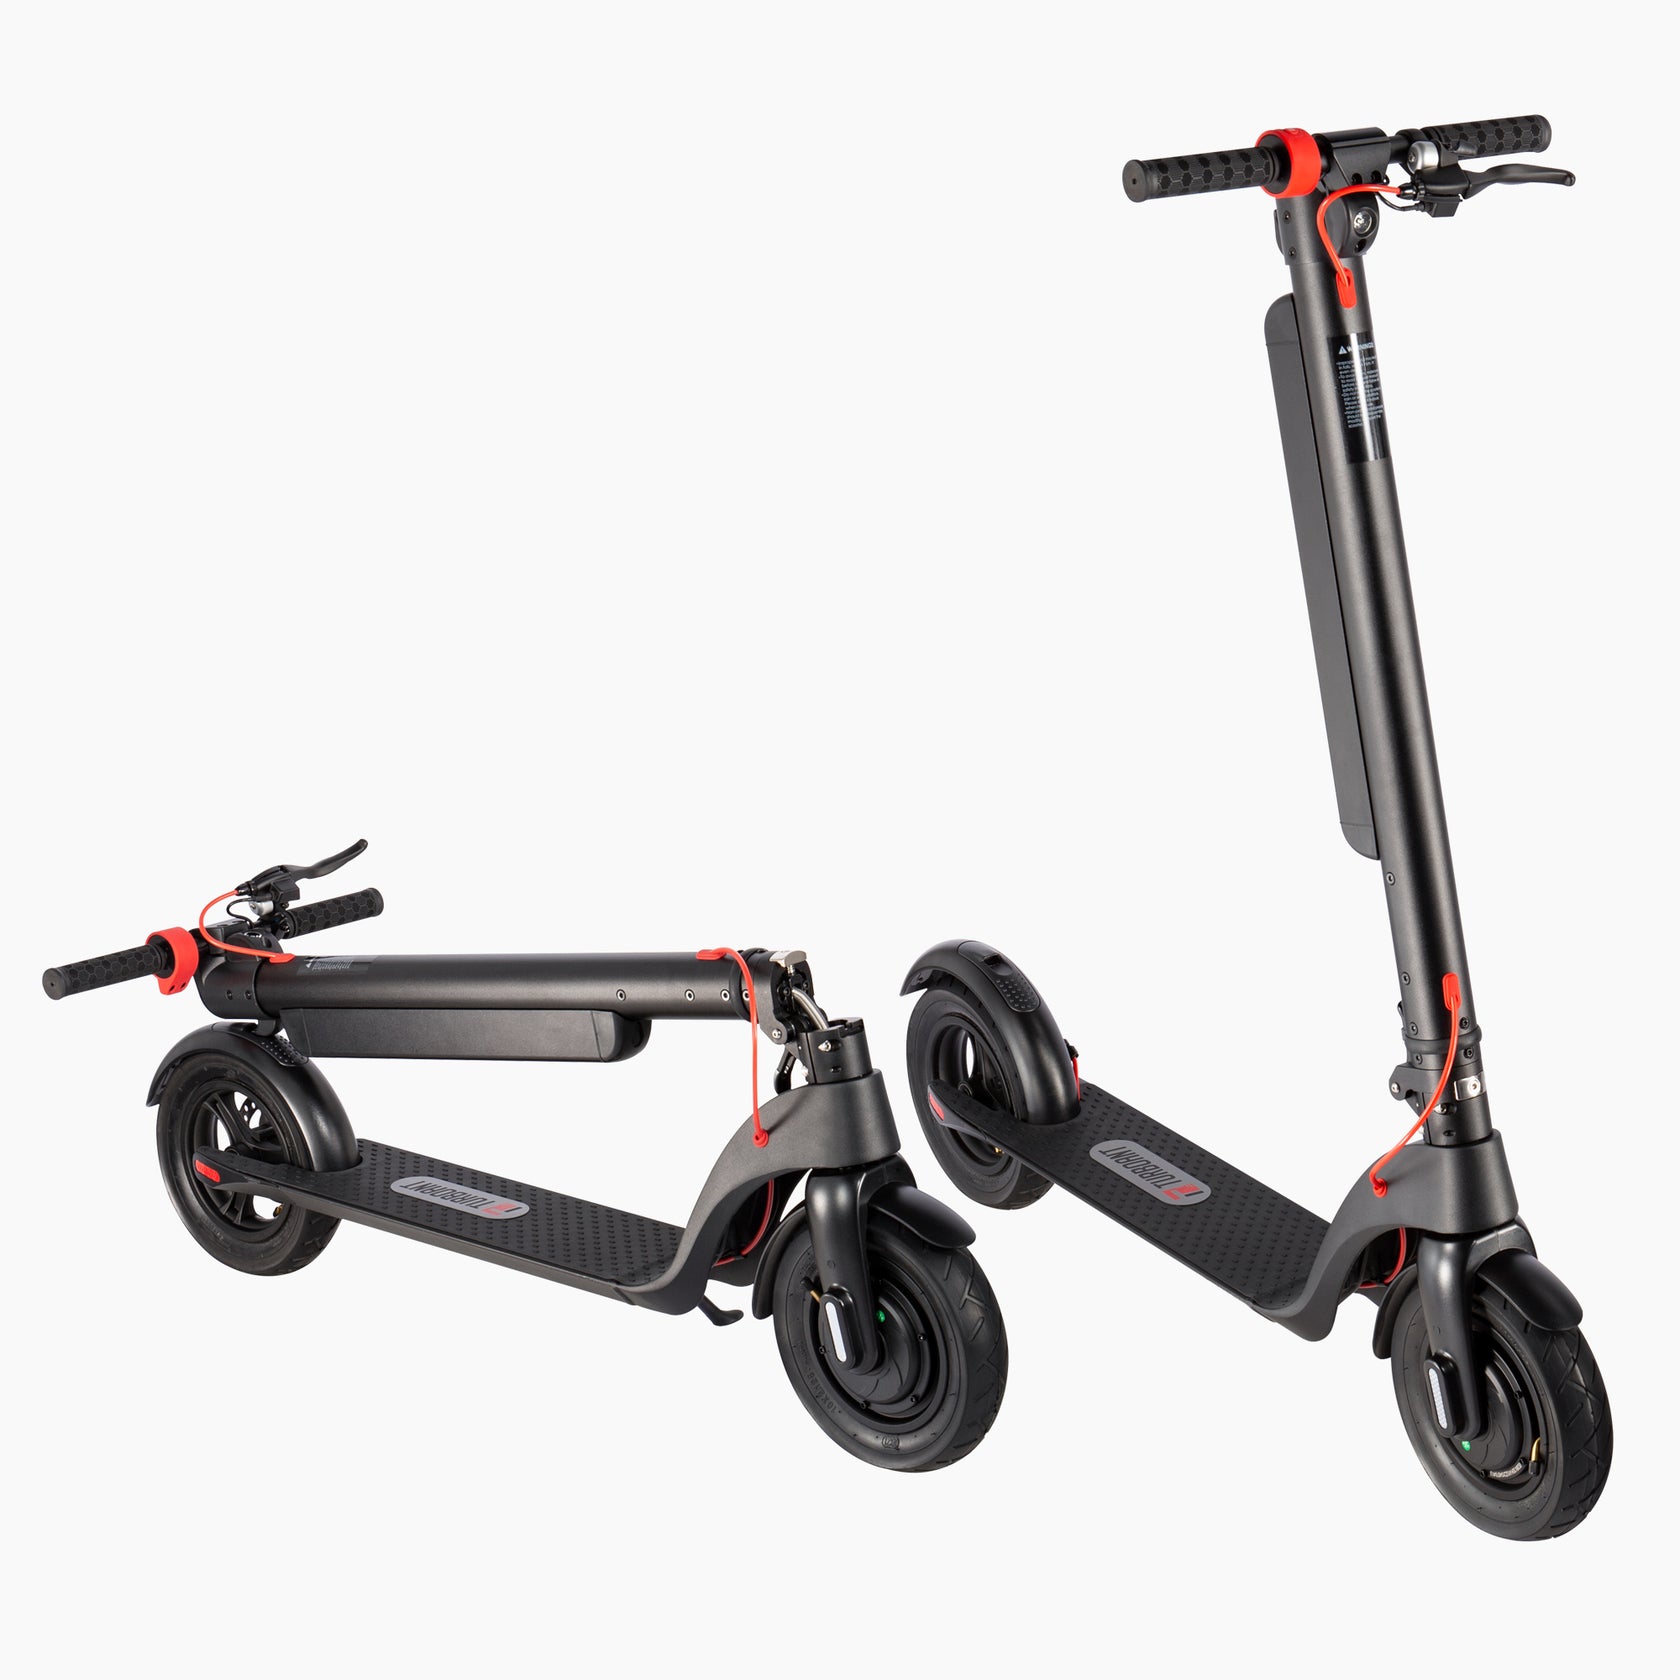 Turboant X7 Pro fast electric scooter